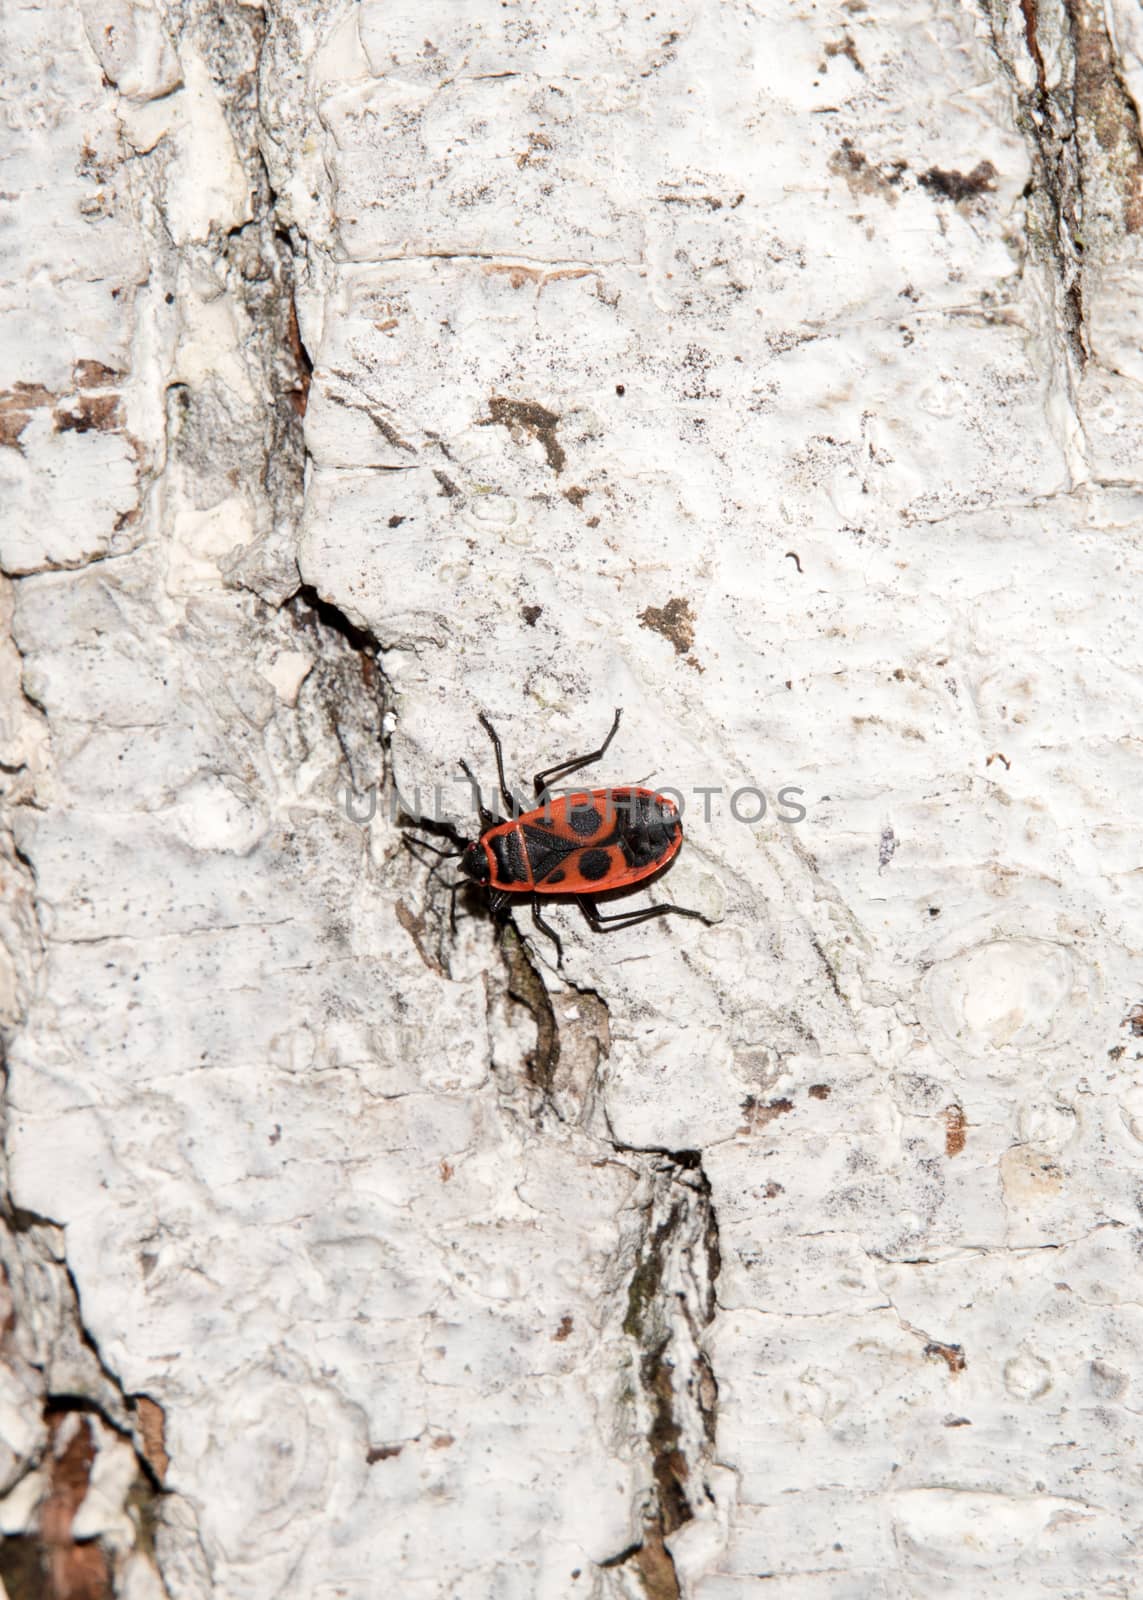 Bedbug-soldier on a tree trunk, red-black beetle. Whitening the bark of the old cracked wood for background and texture.